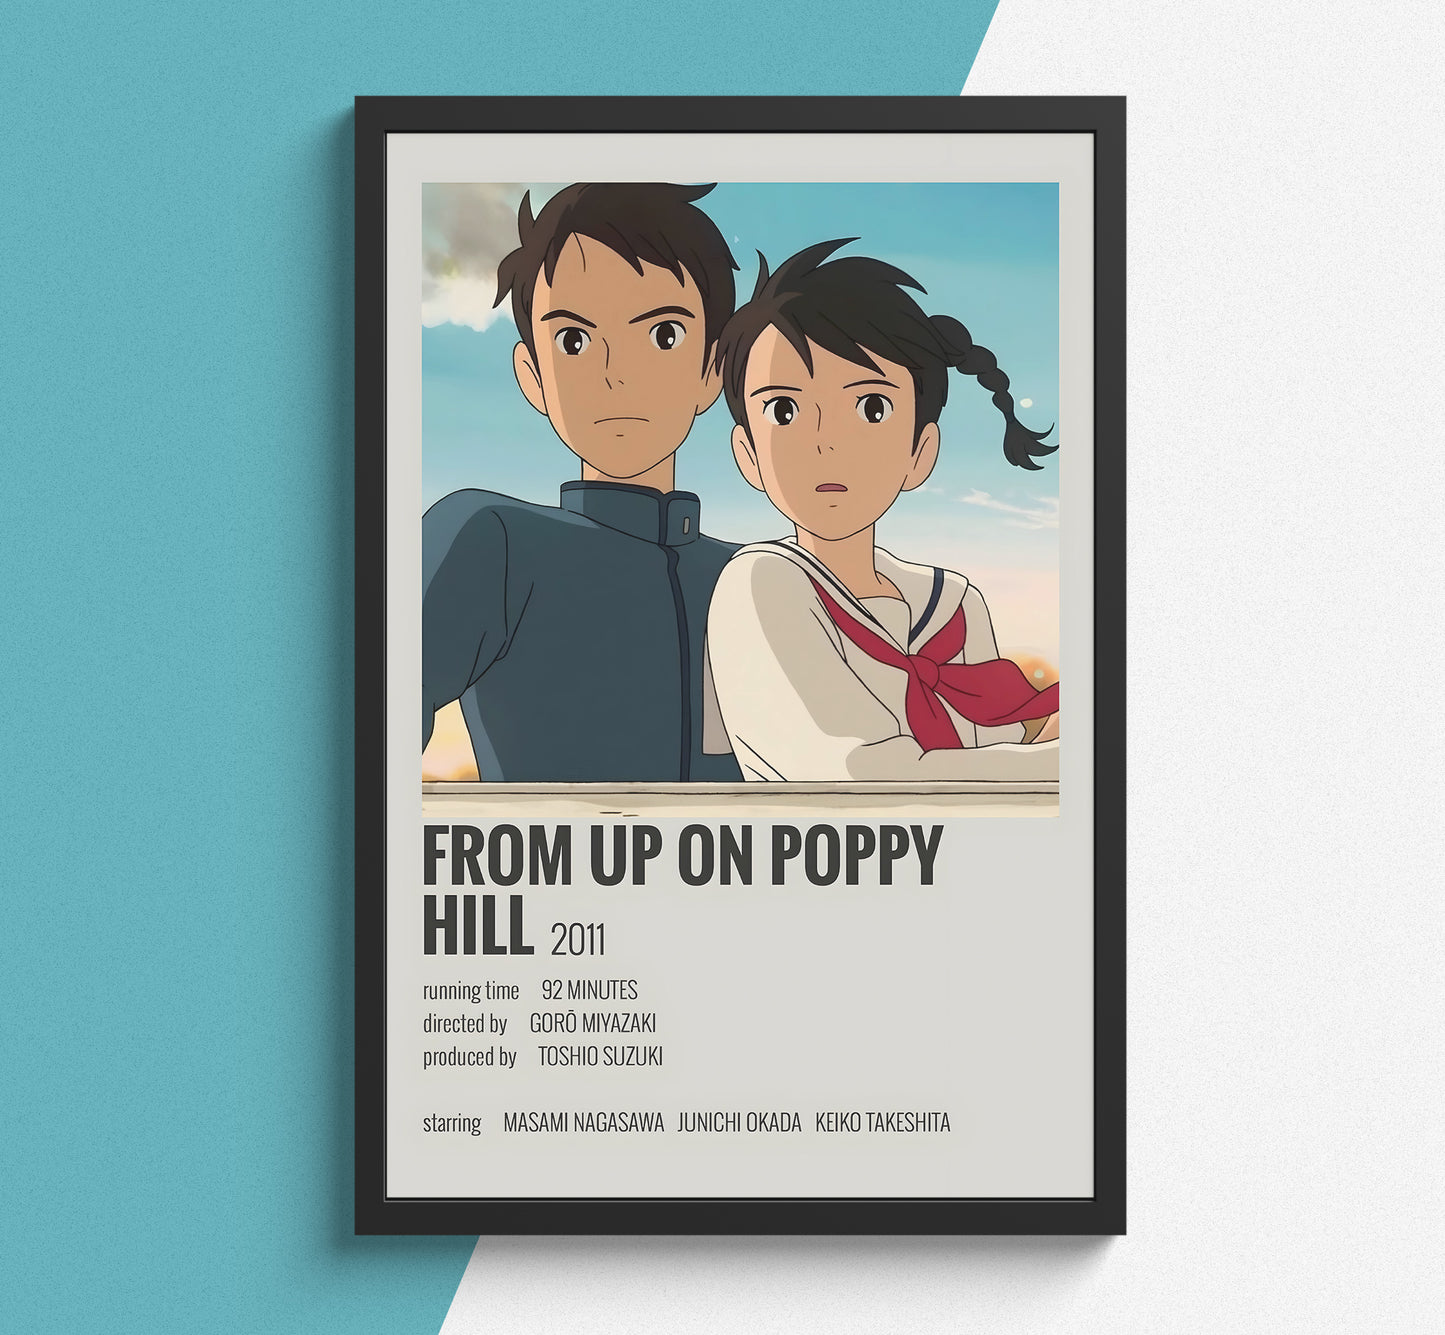 From Up On Puppy - Poster